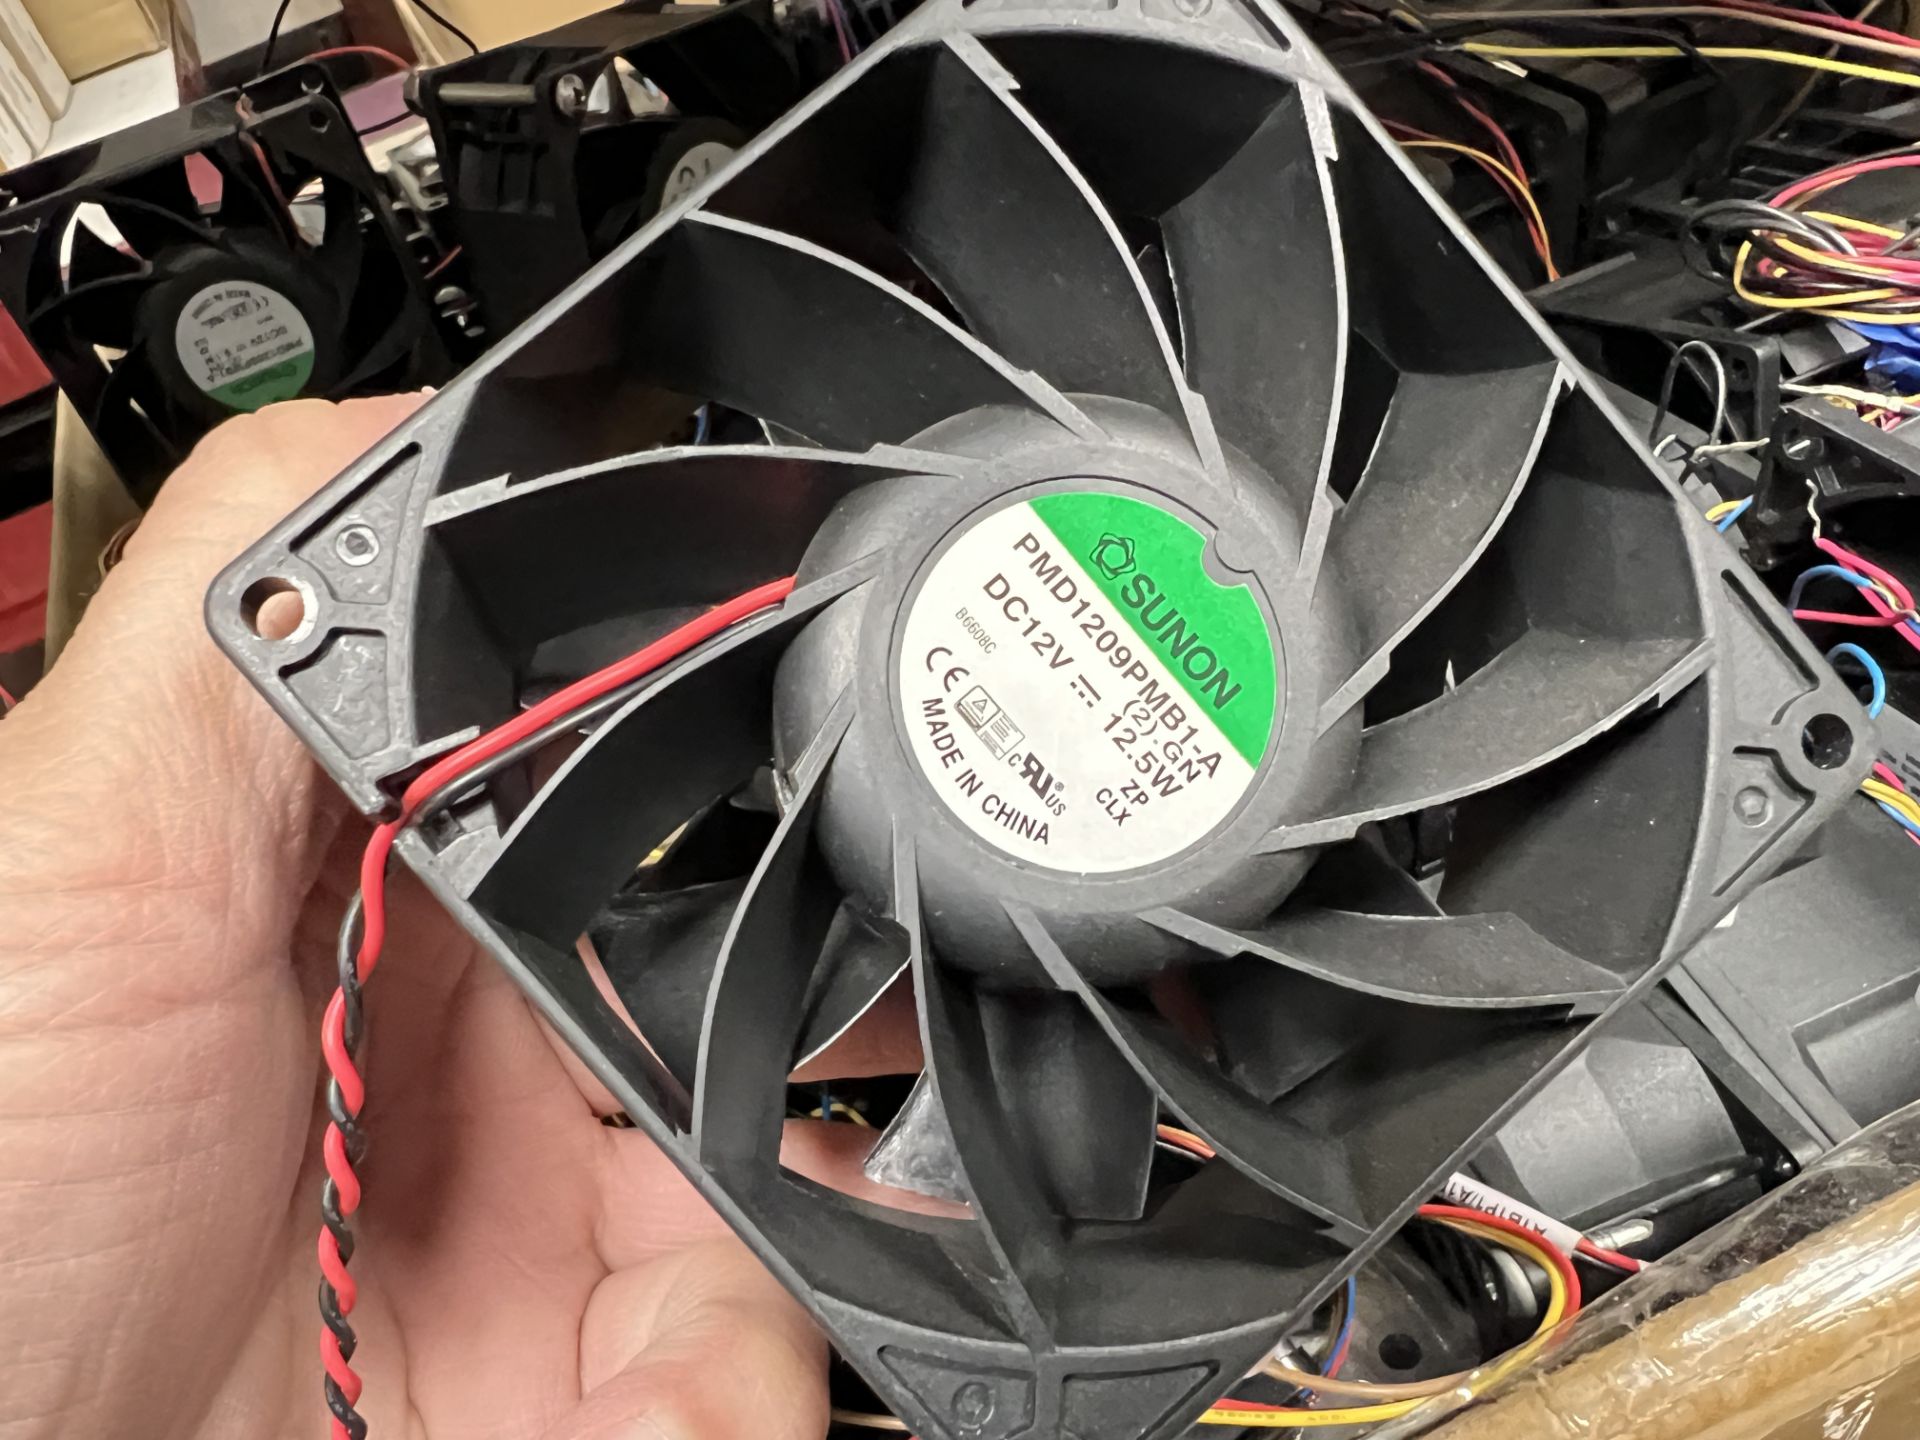 Axial Fans /DC Cooling Fans - Image 17 of 20